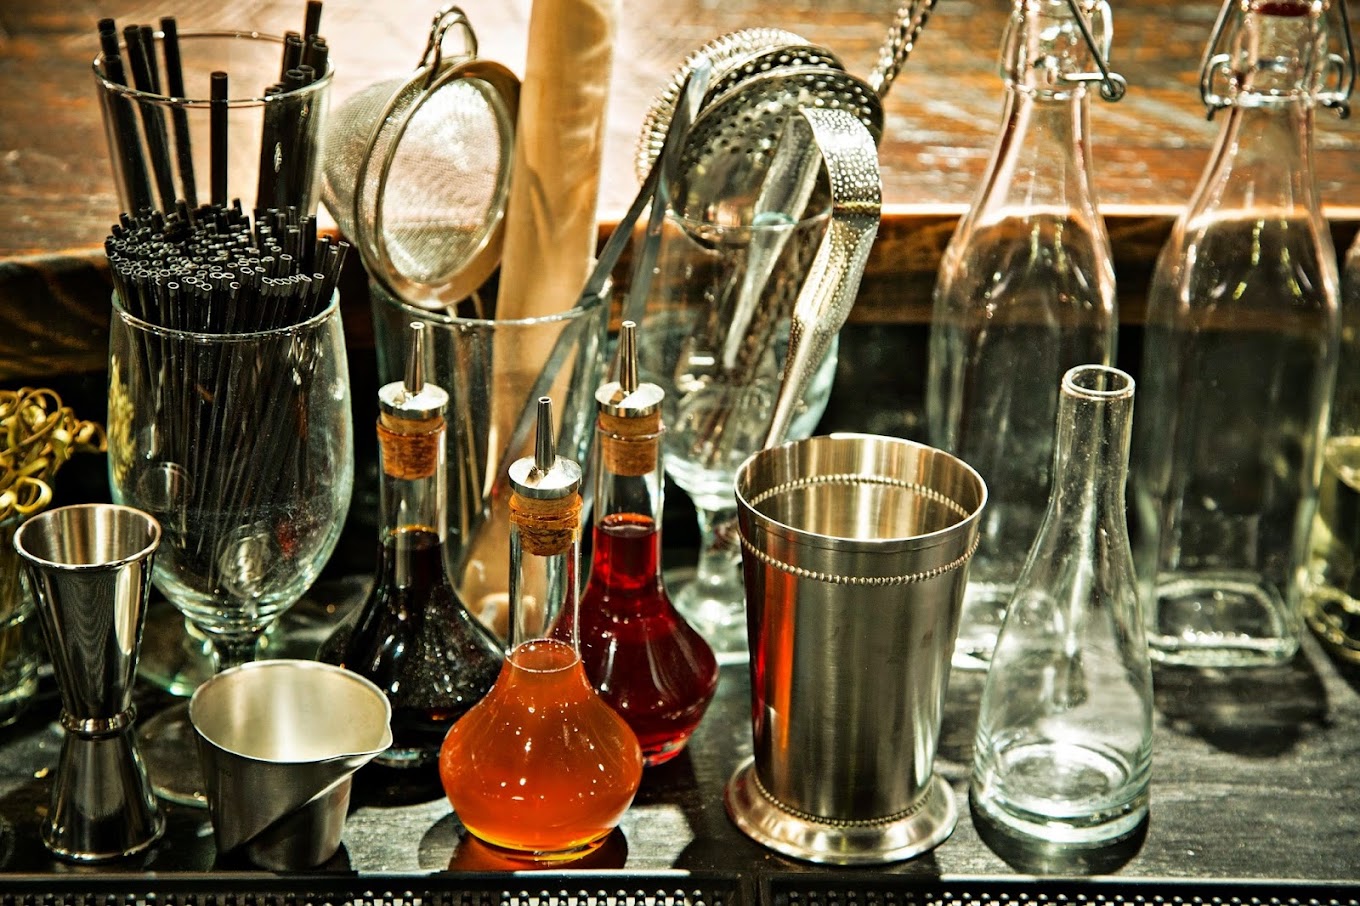 A selection of amber liquids in bottles and other glassware at McClellan’s Retreat.